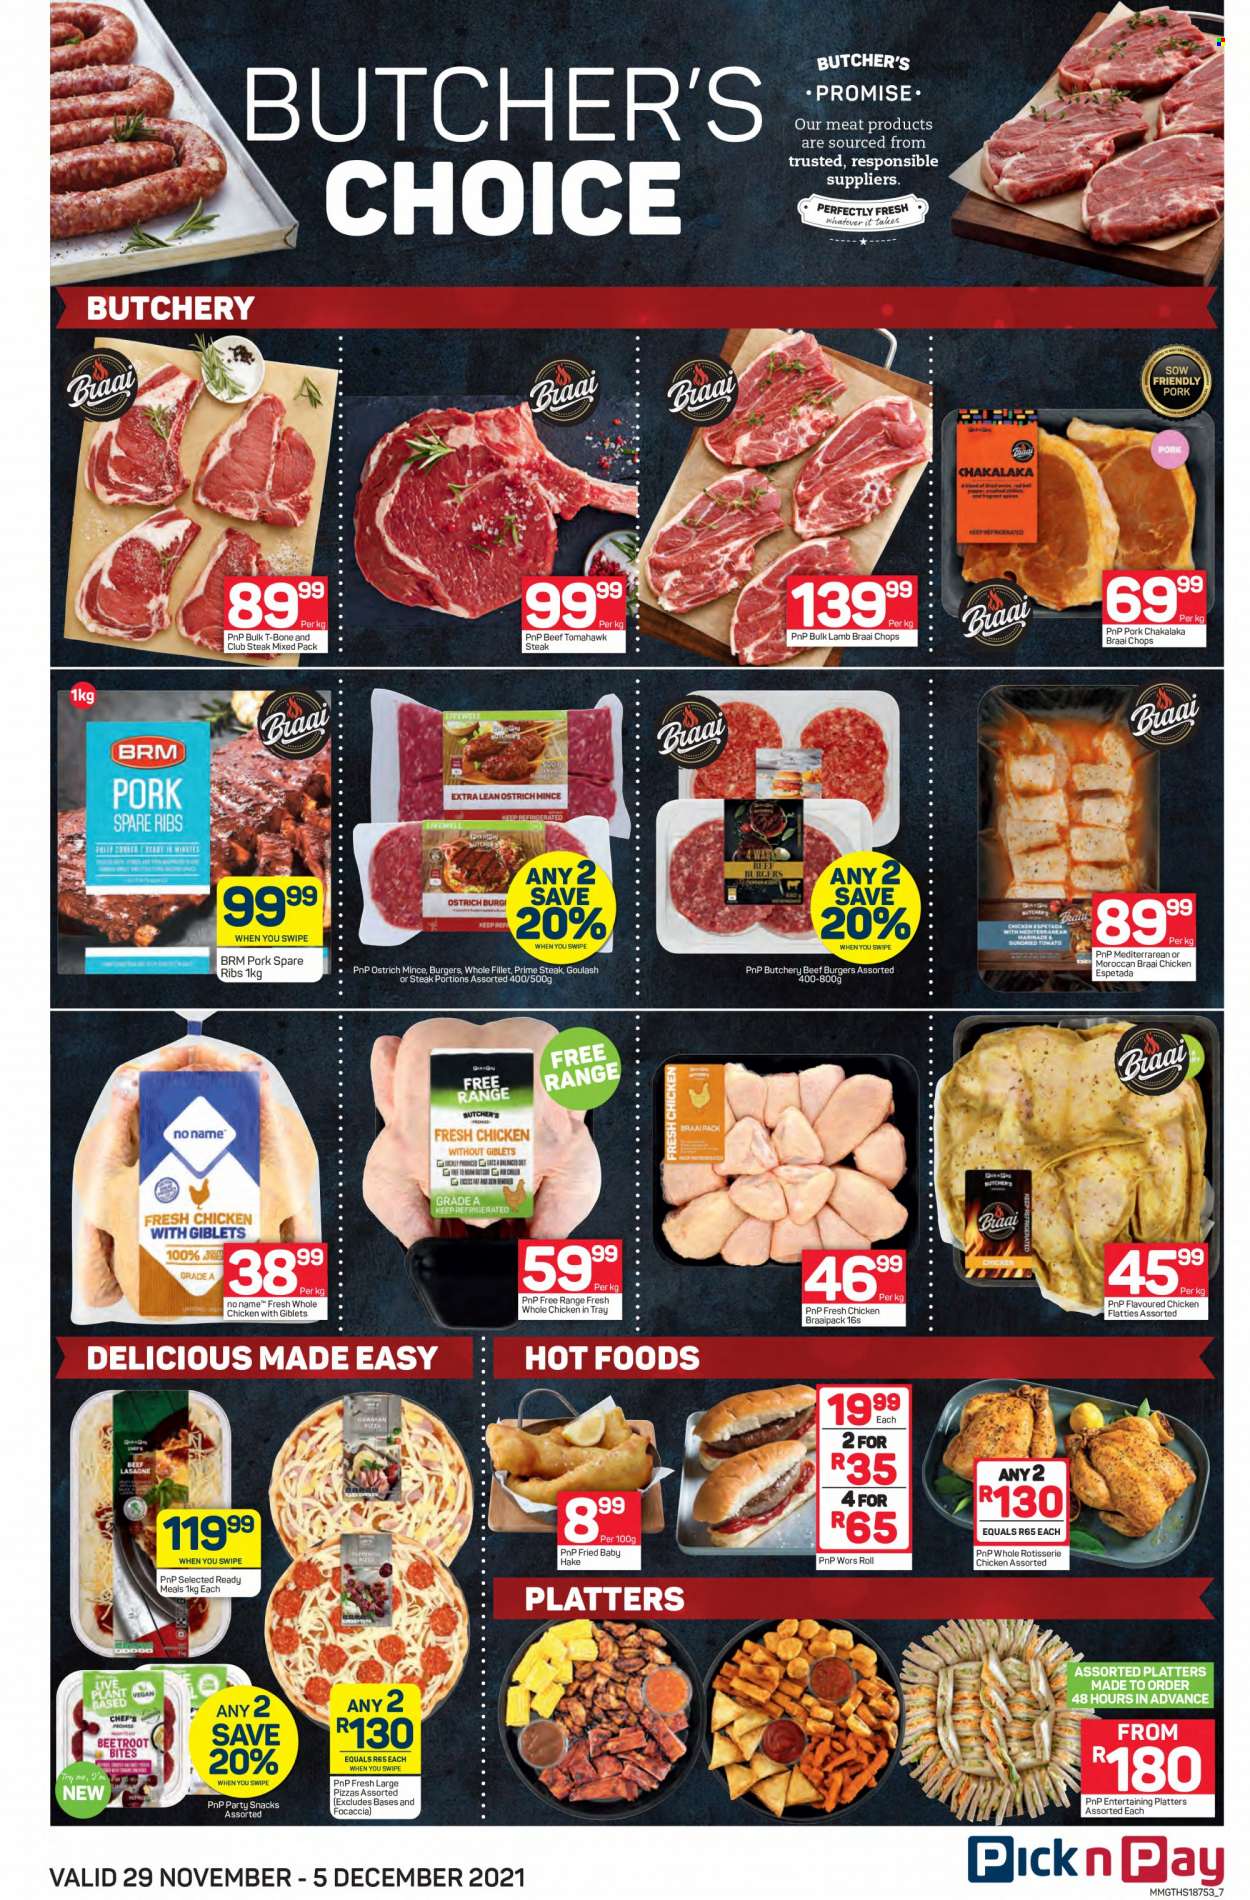 Pick n Pay specials - 11.29.2021 - 12.05.2021. 